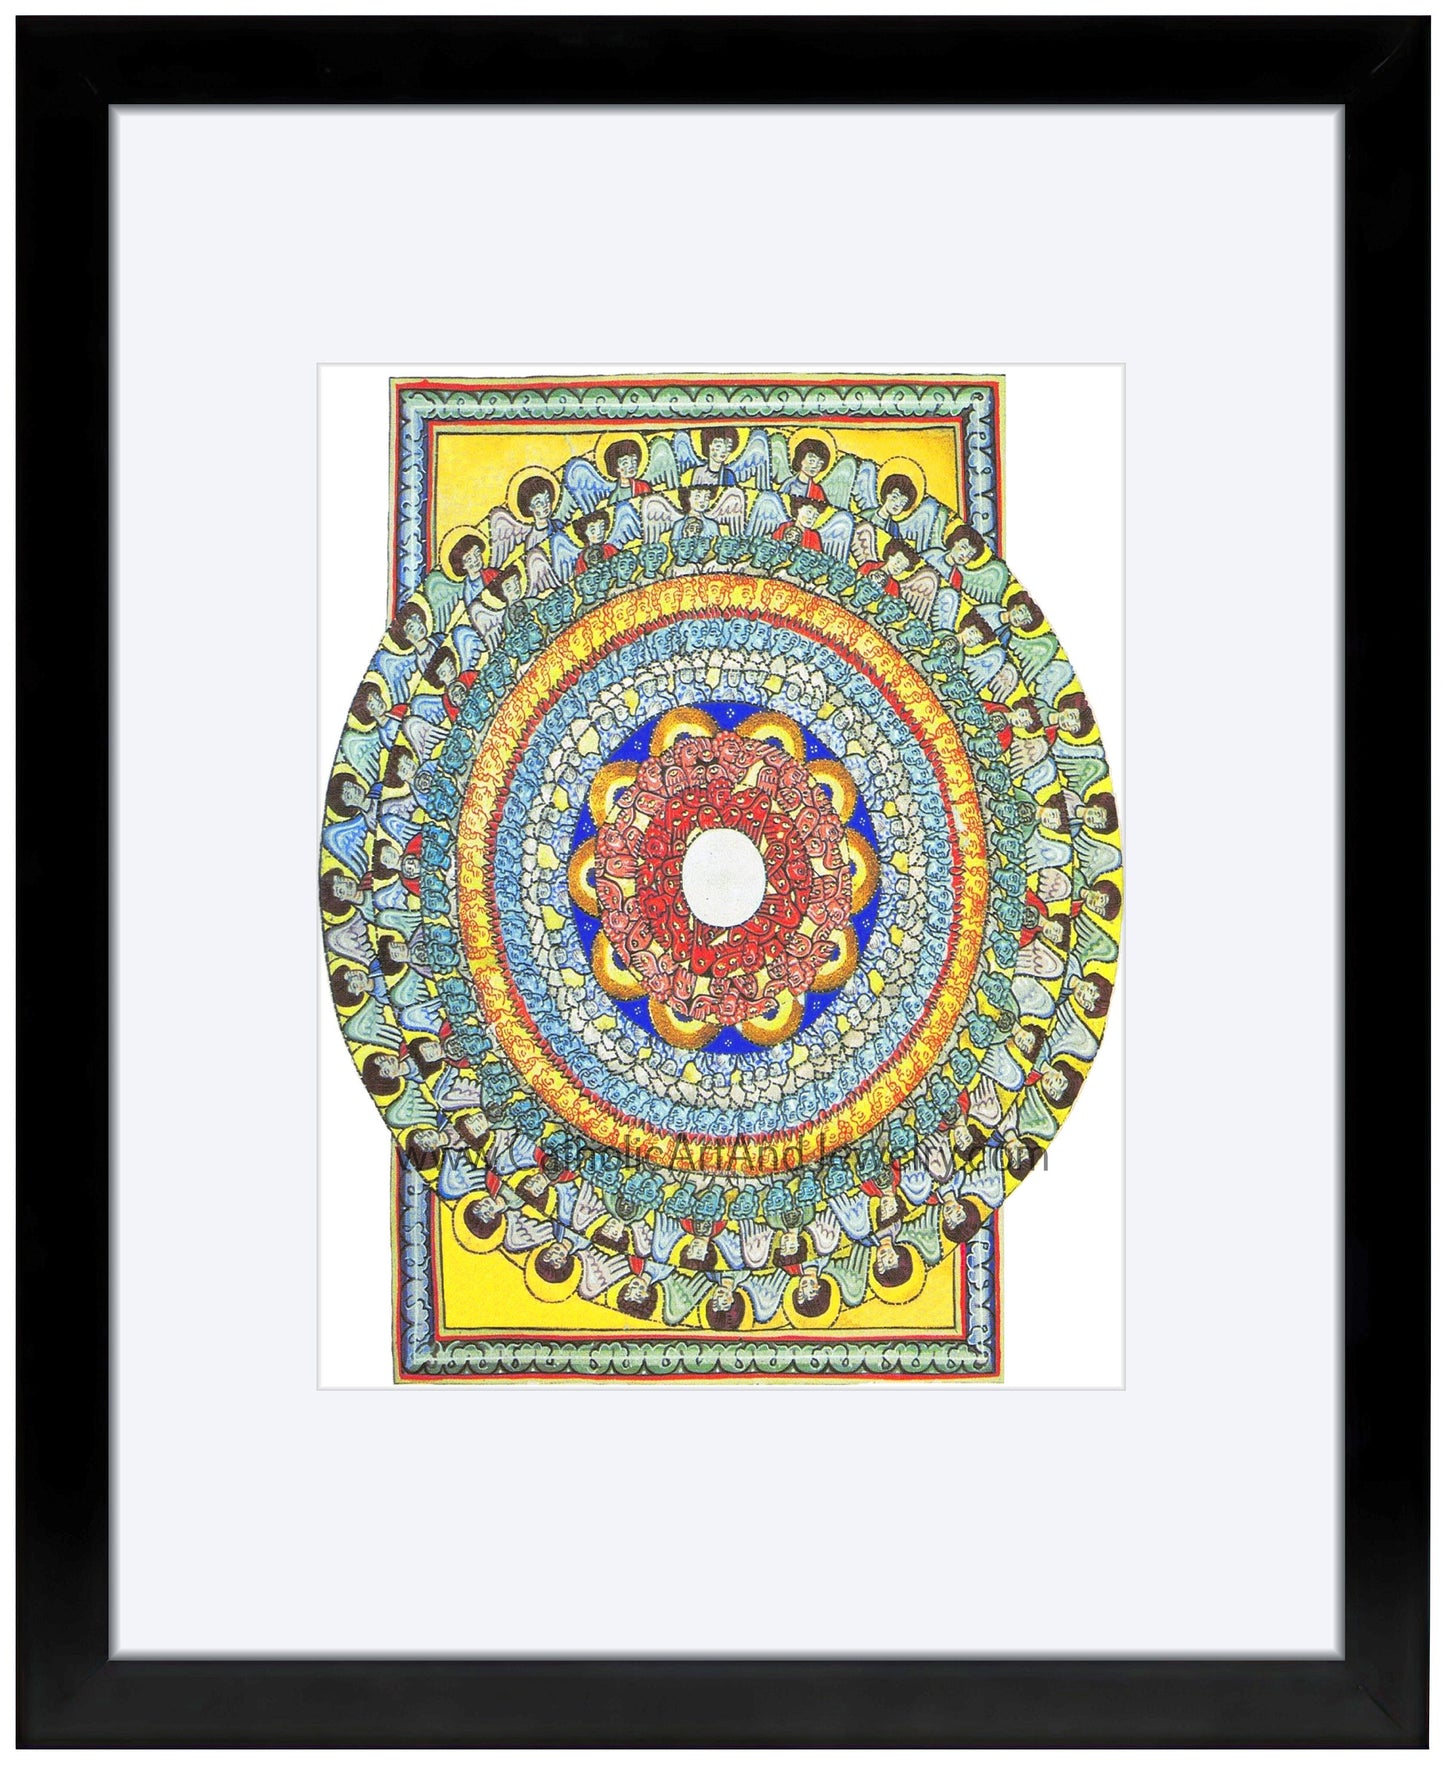 Hildegard of Bingen's Art: All Beings Celebrate Creation – 3 Sizes – circa 1150 A.D. – Medieval Catholic Art Print – Archival Quality